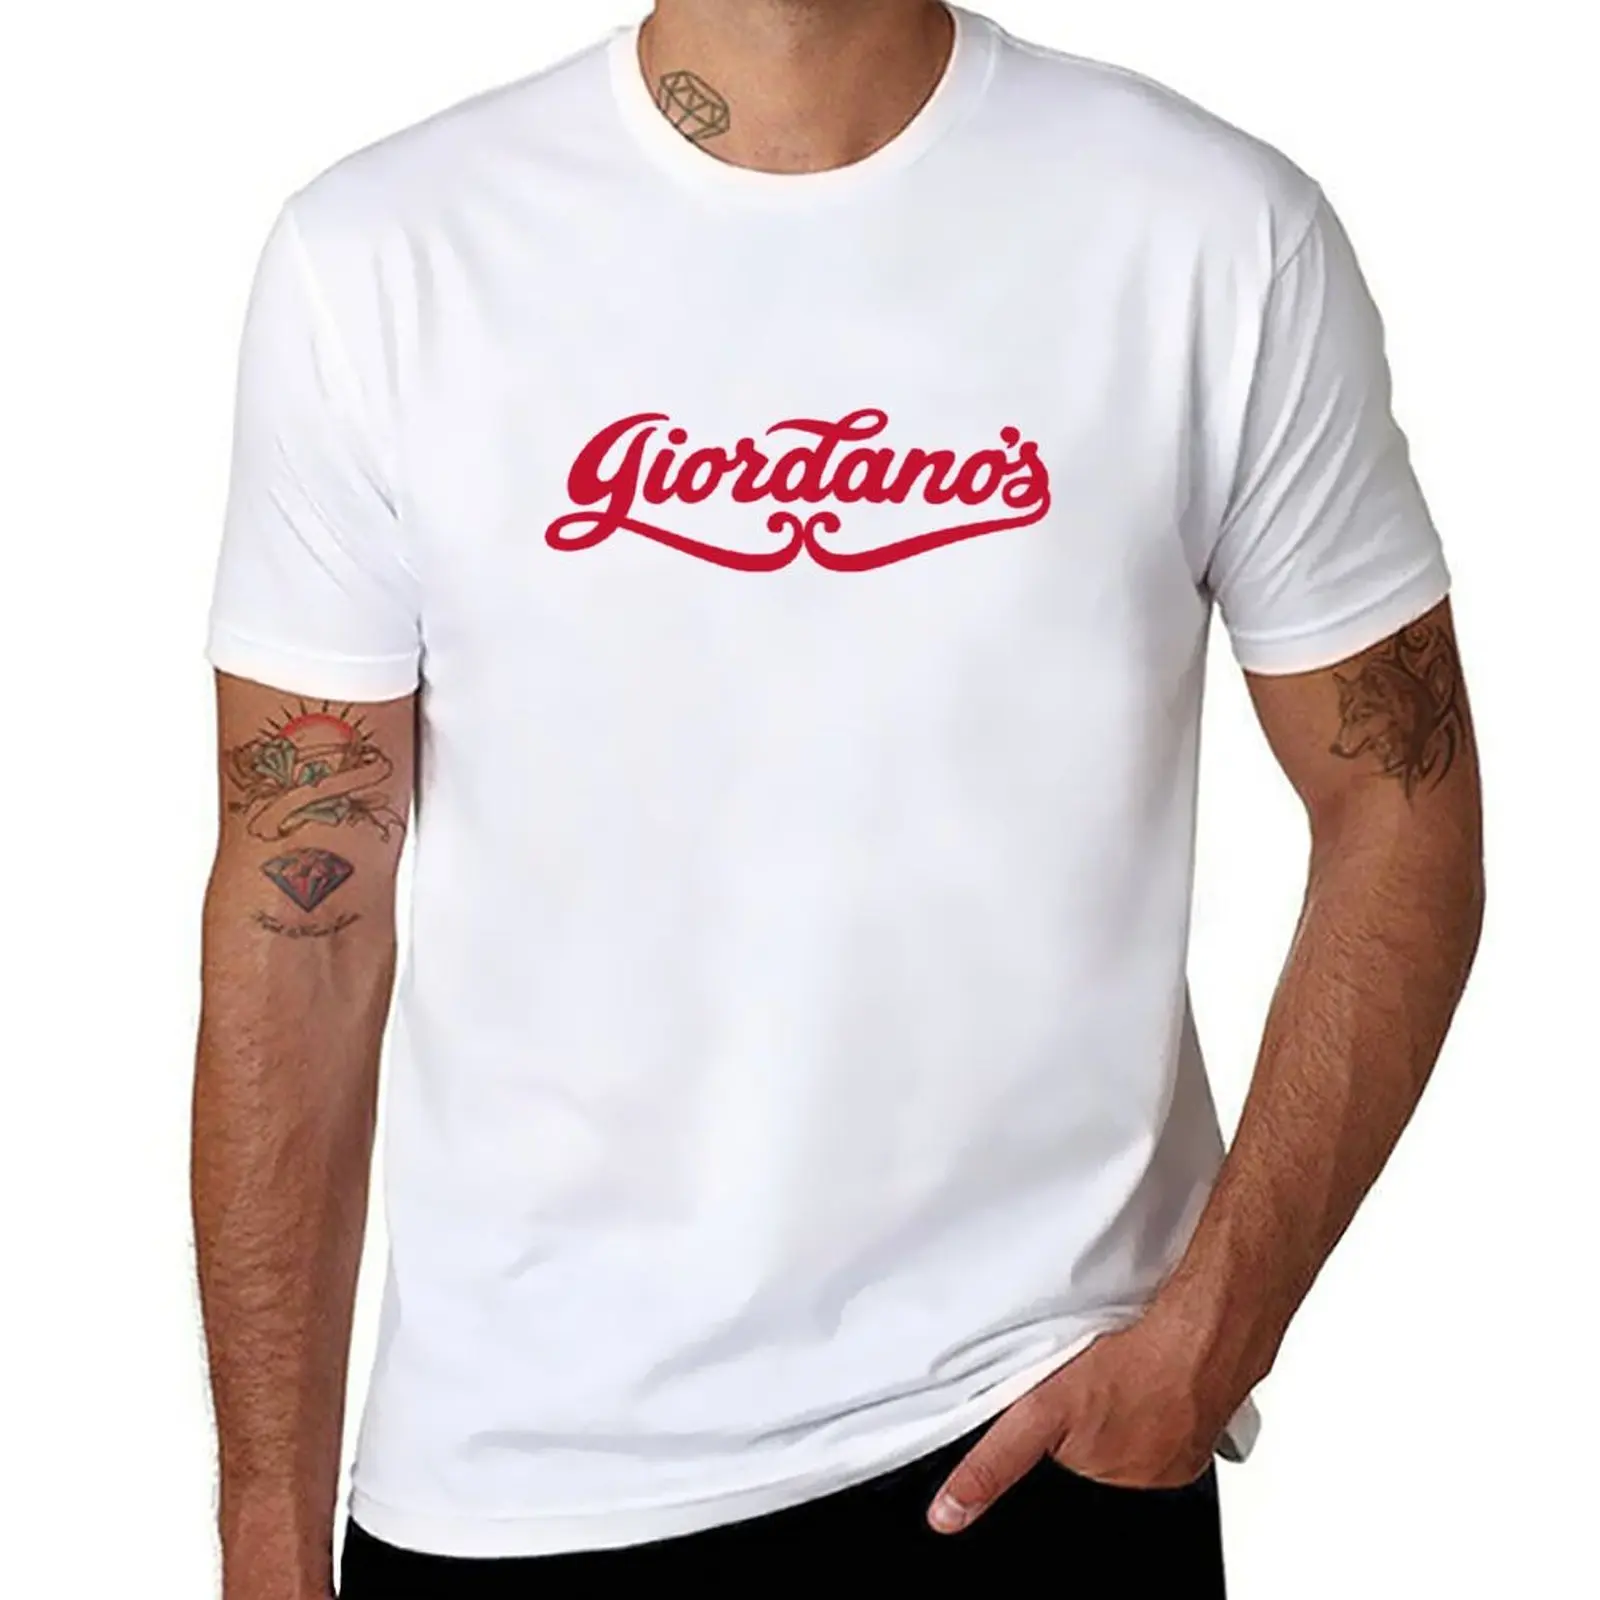 New Giordano’s Pizza T-Shirt Anime t-shirt tees plus size tops tops mens big and tall t shirts